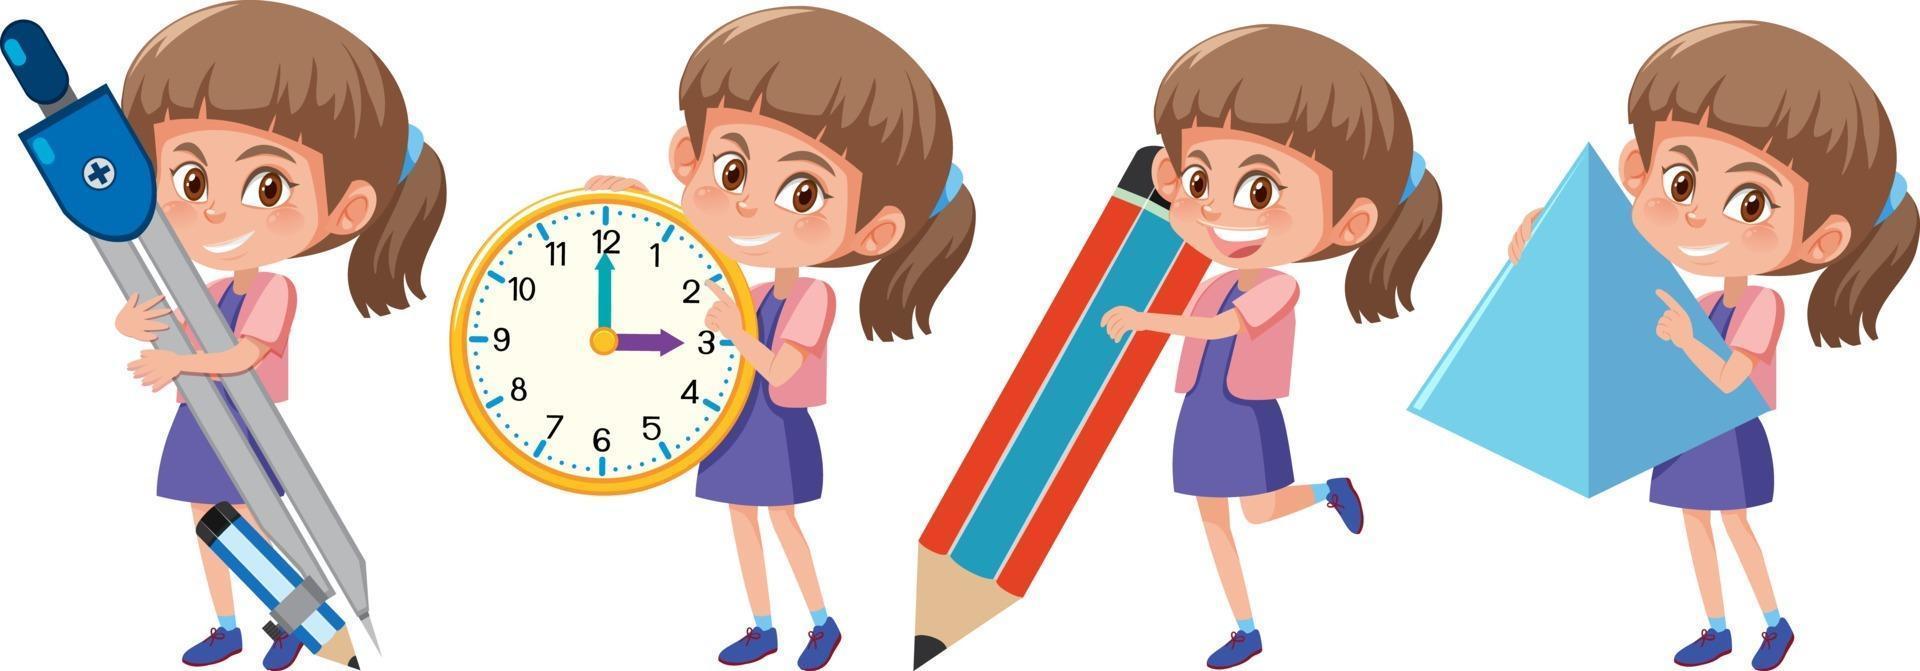 Set of a girl holding different math tools vector